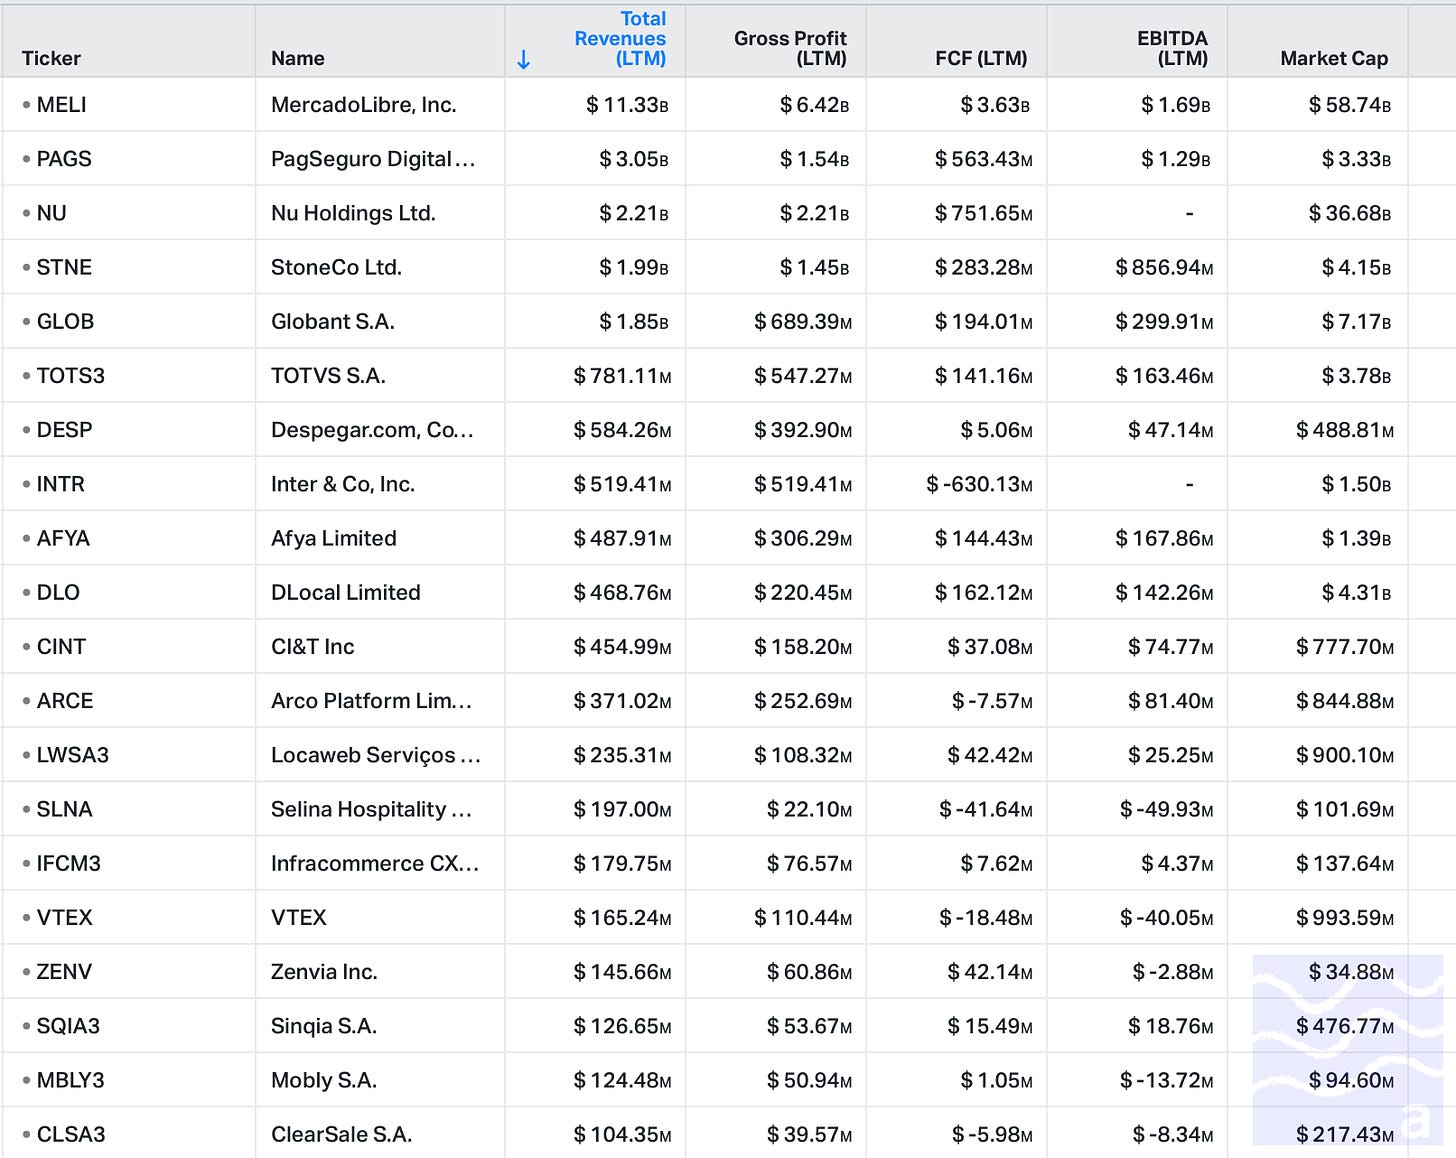 24 public tech companies in the U.S. (founded since 2003) with revenue over $1 billion and EBITDA positivity. Screenshot from Koyfin.